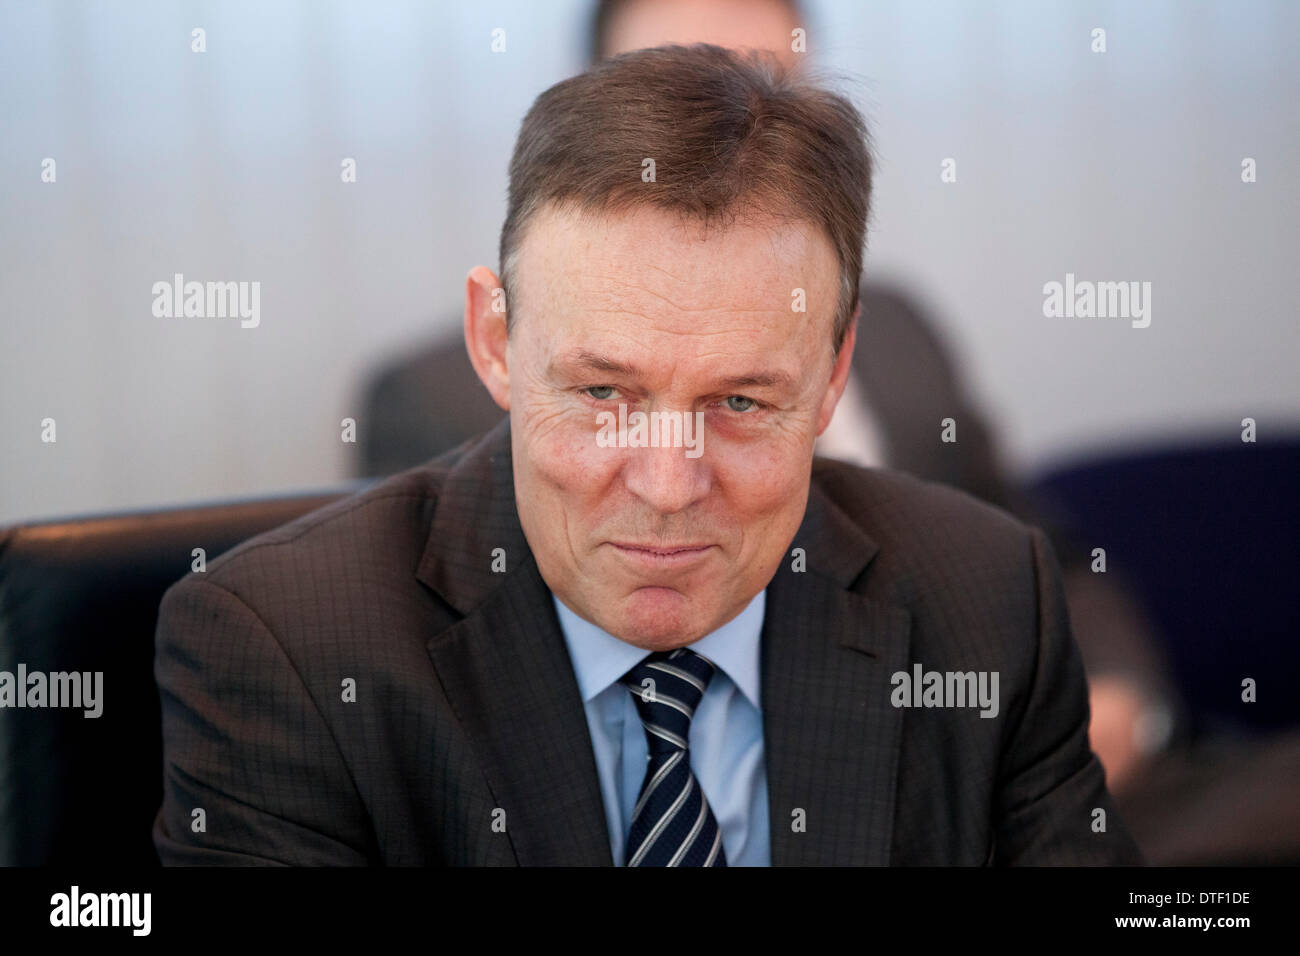 Berlin, Germany. February 17th, 2014. SPD party leadership meeting at Willy Brandt Haus in Berlin. / Picture: Thomas Oppermann (SPD), Lider of the SPD Parliamentary Group. Credit:  Reynaldo Chaib Paganelli/Alamy Live News Stock Photo